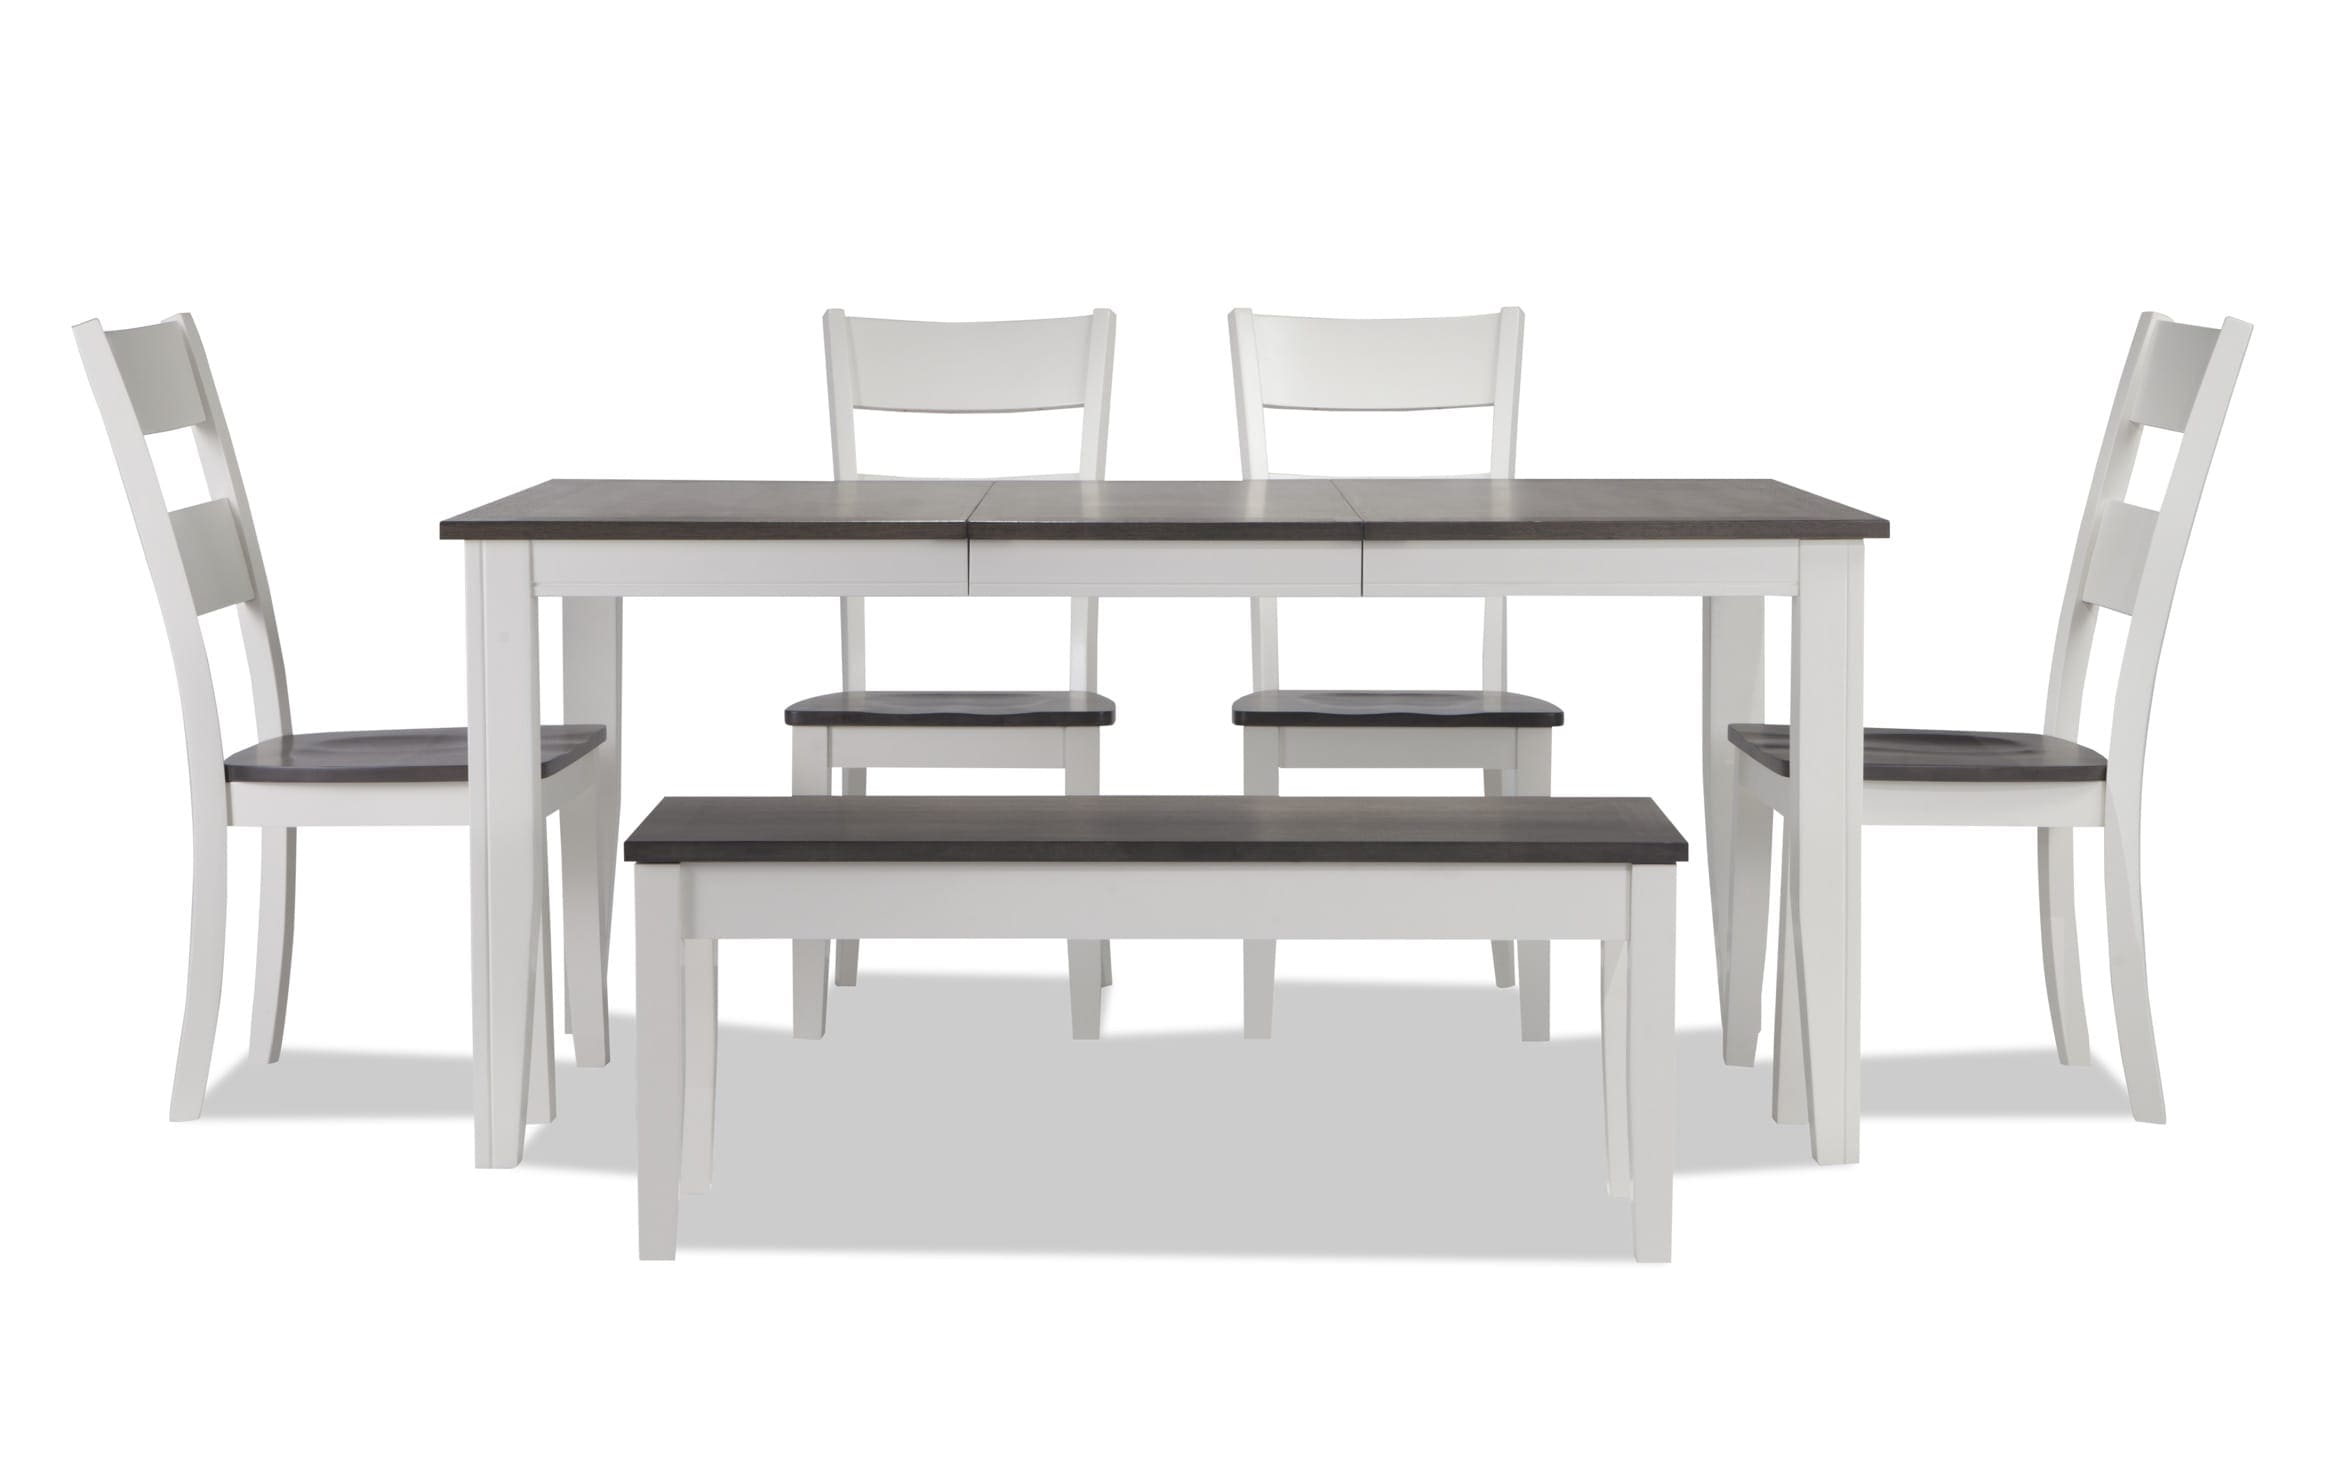 Blake Gray White 6 Piece Dining Set, Dining Room Table With Storage Bench